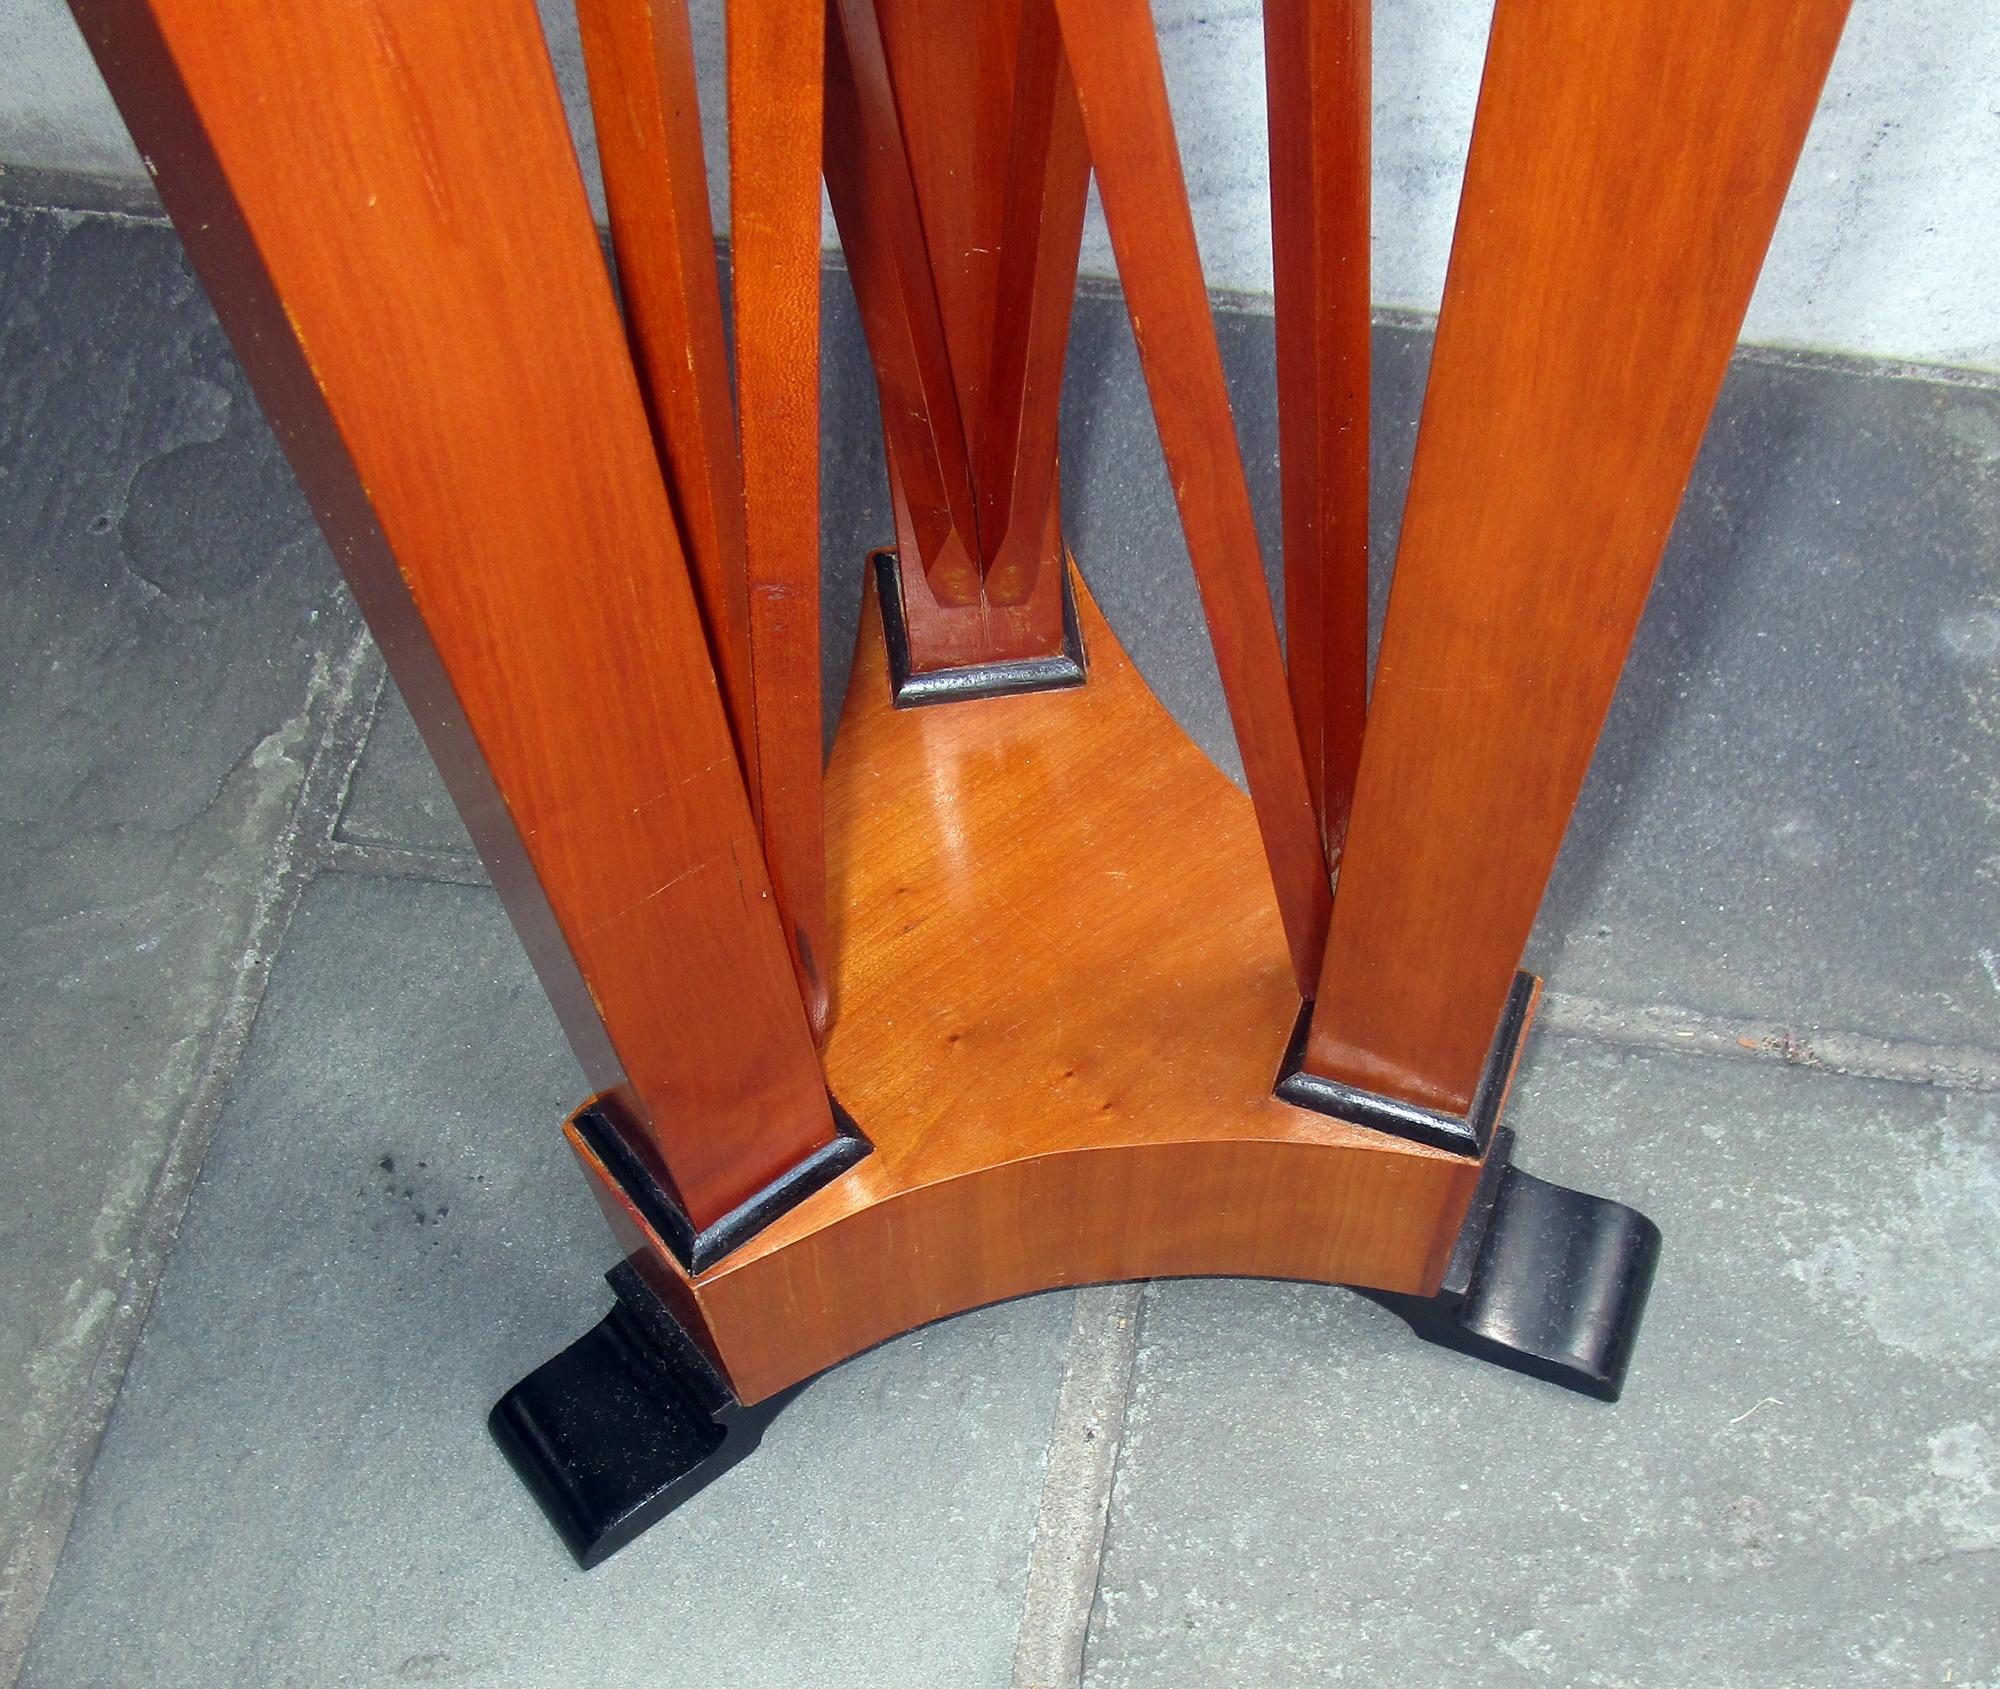 Classic modern pair of veneered maple pedestals in the Biedermeier style. Nice detail with ebony accents. Sturdy footing for holding heavy decorative objects or plants.See measurements below.